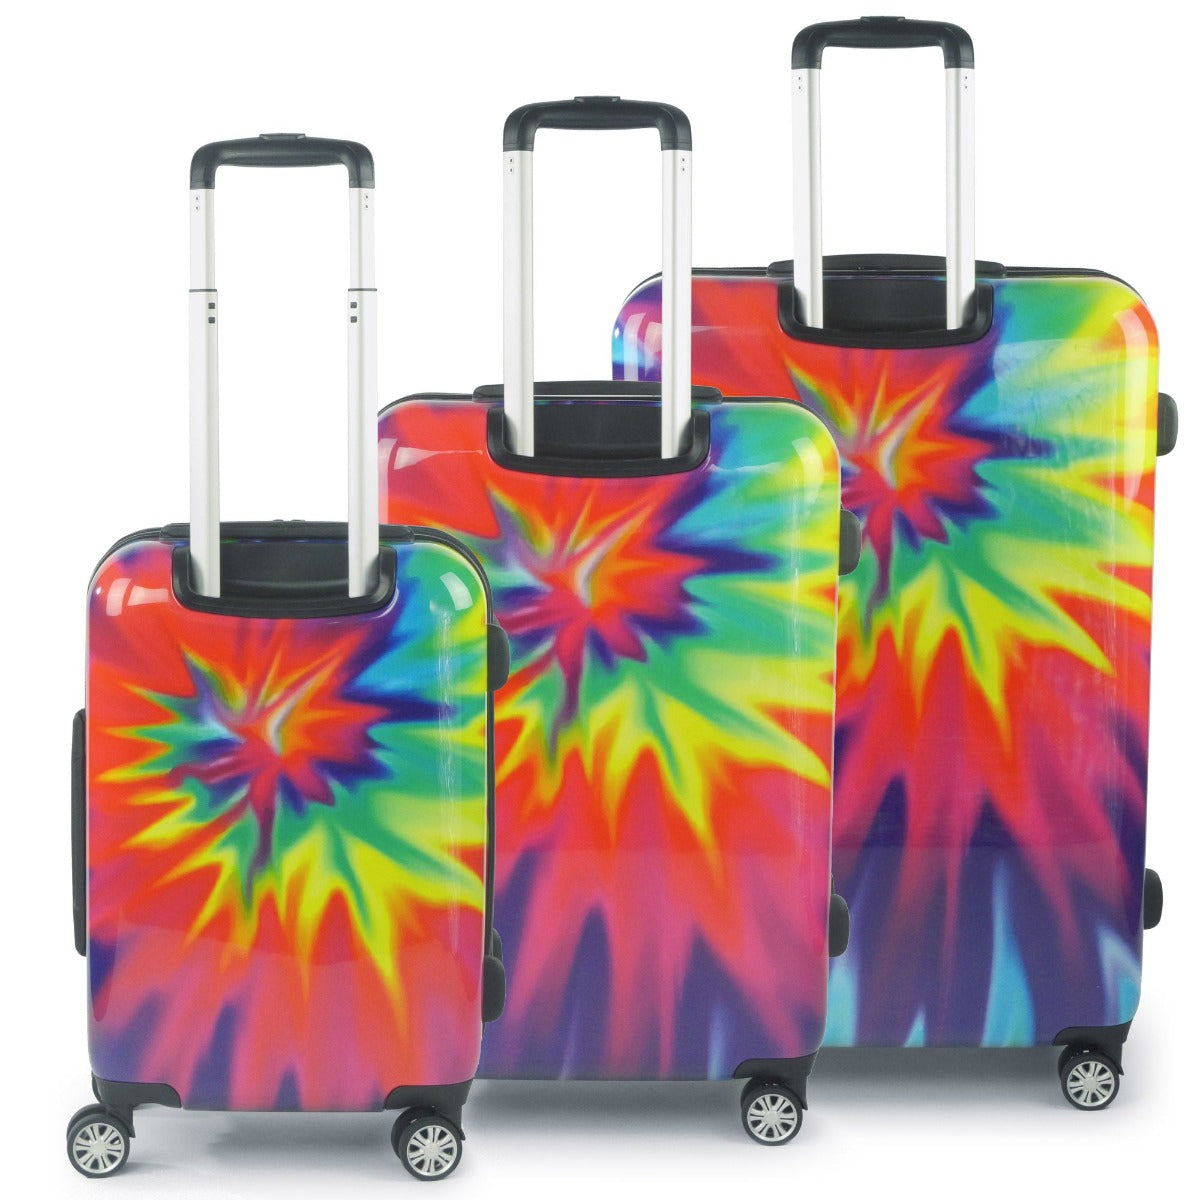 Tie dye Rainbow Swirl Suitcase Ful Hard sided 3 Pc Rolling Spinner Luggage Set 22" 24" 28" On Sale $50 off